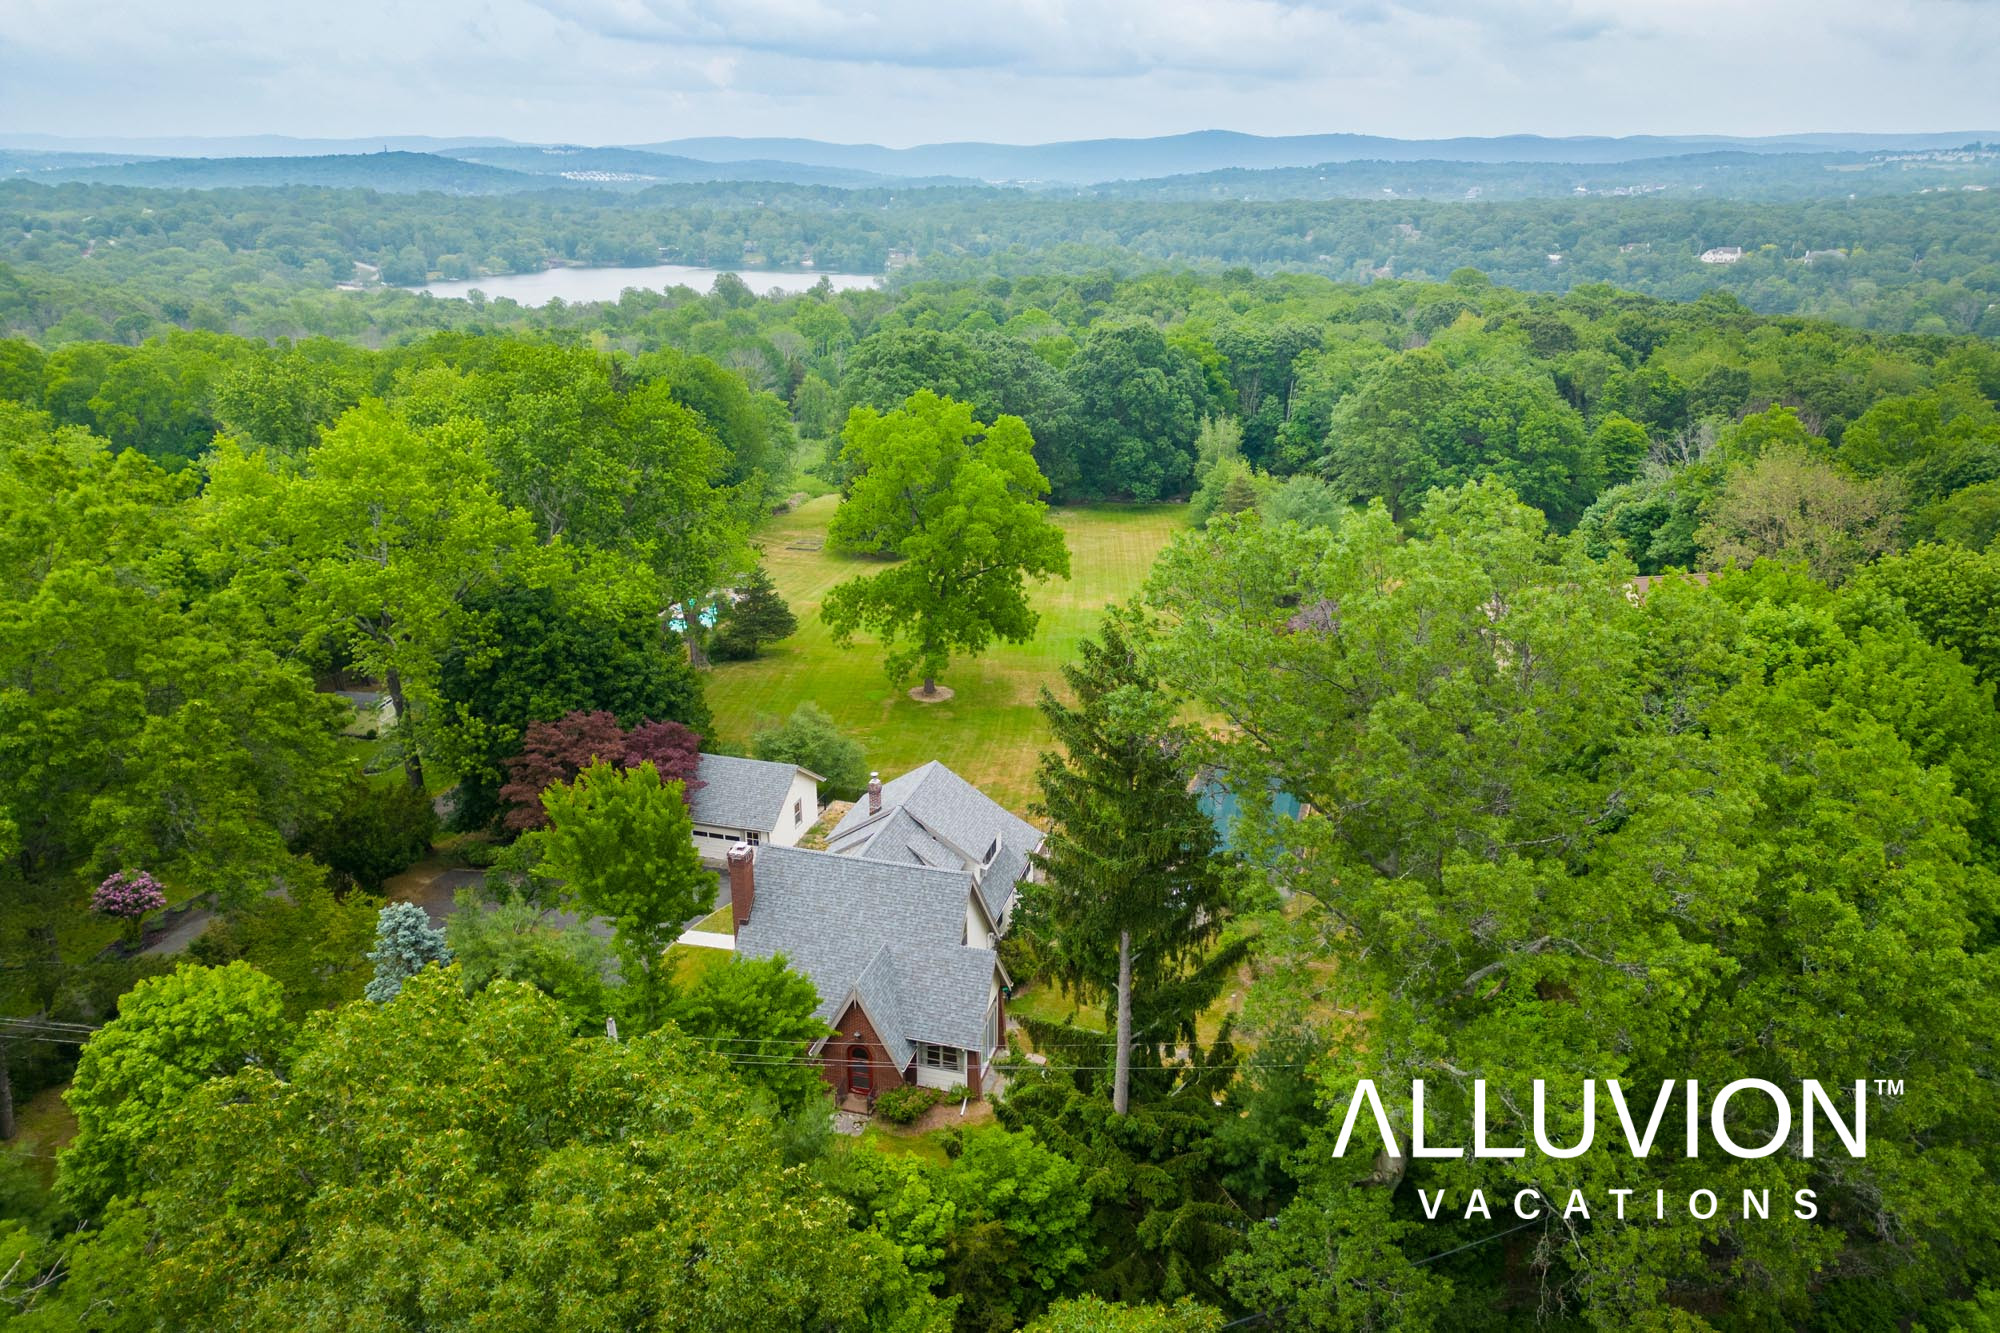 Experience a Fairytale Summer Getaway at Our Rustic Airbnb Retreat in Monroe, NY – Airbnb Photography by Alluvion Media